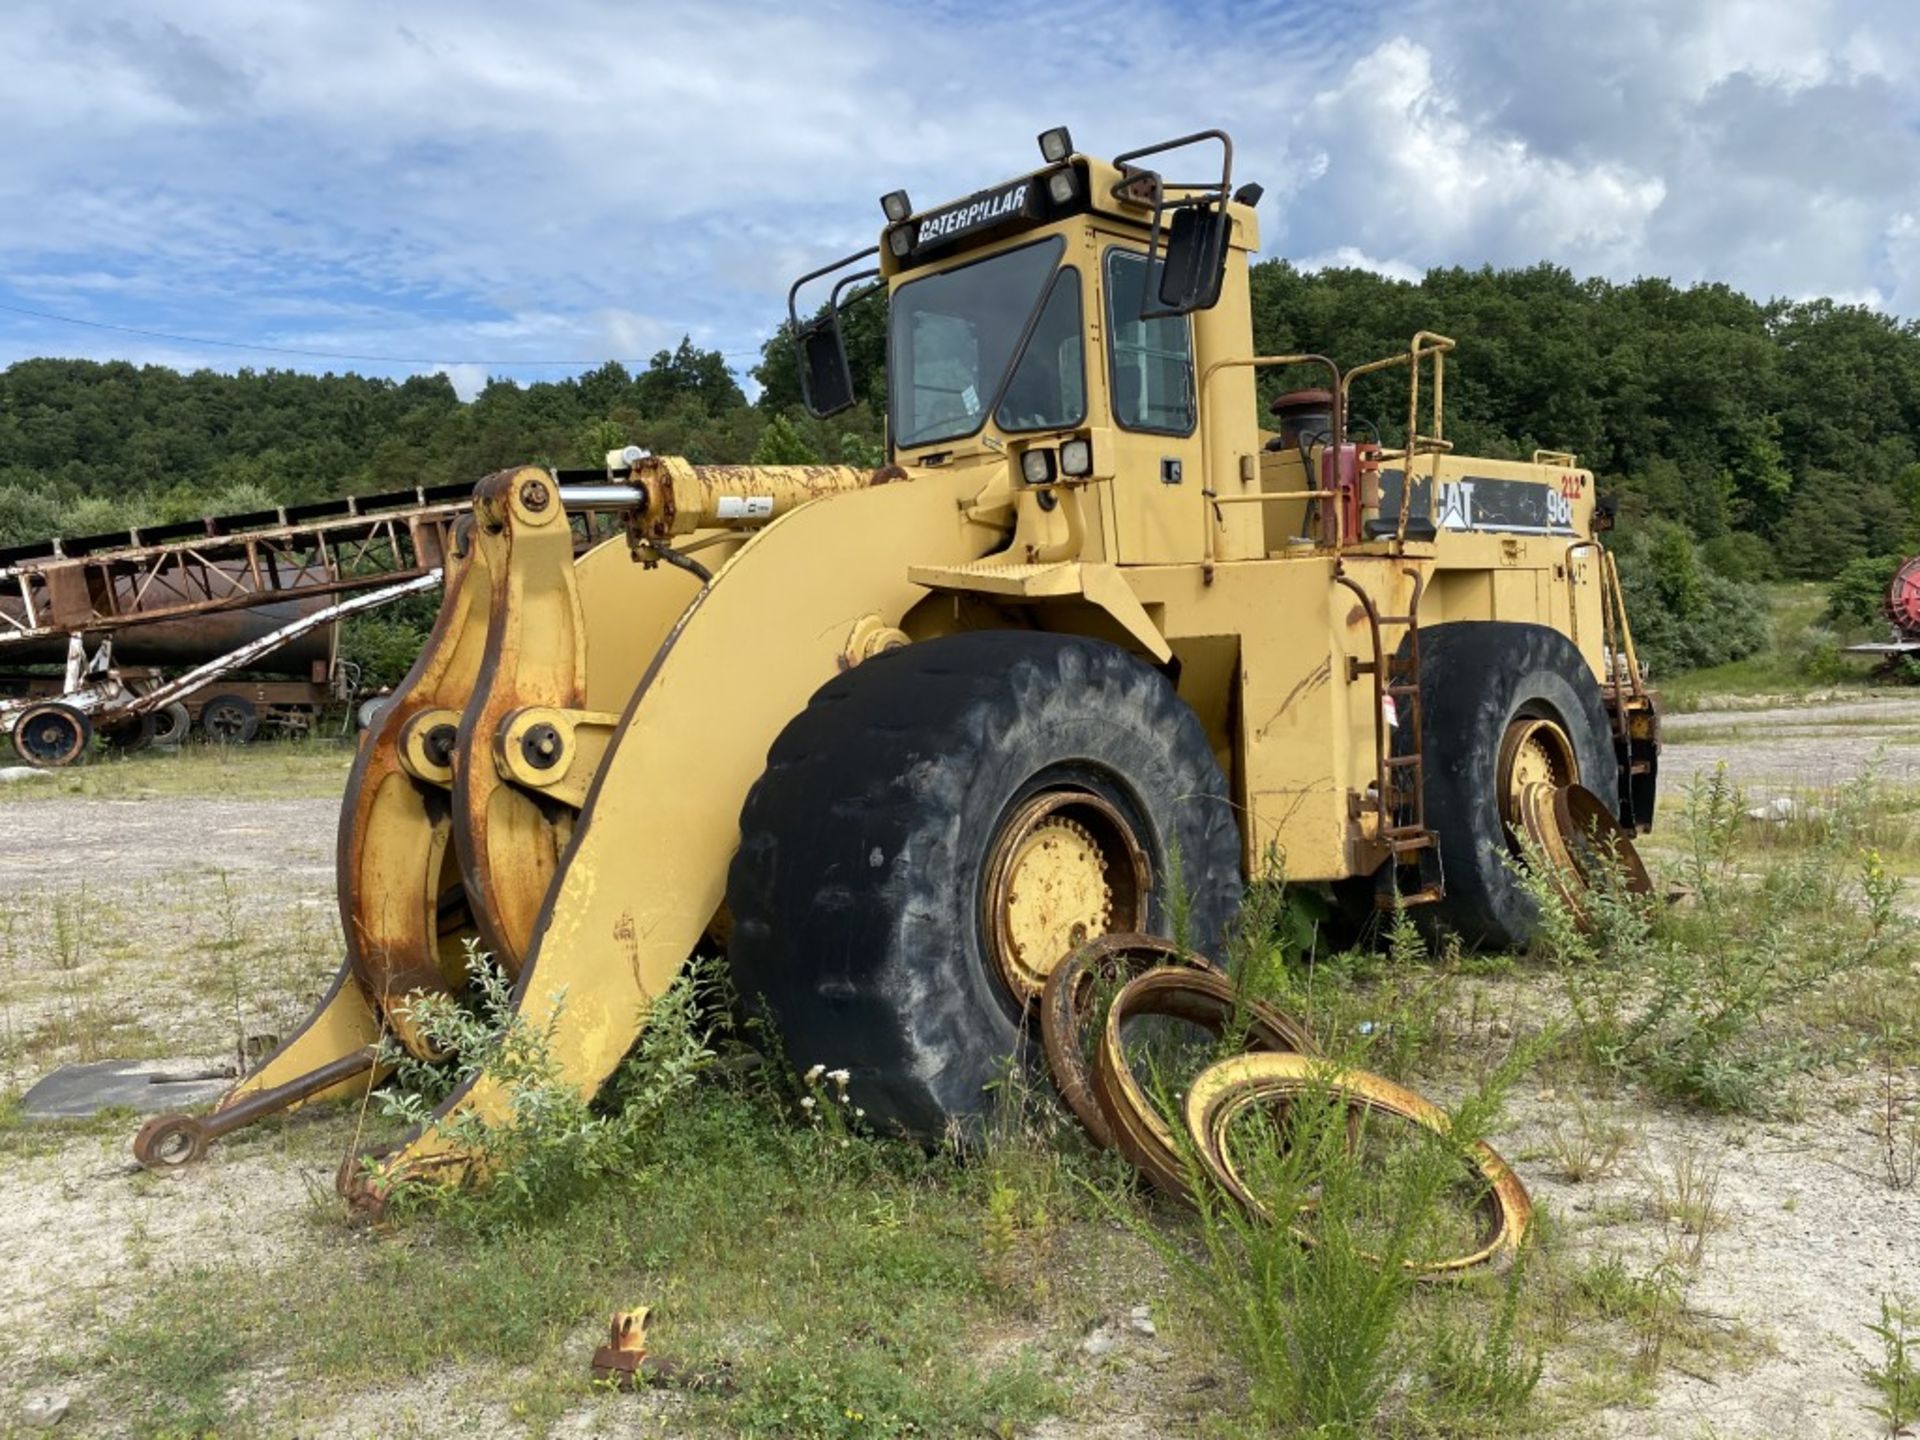 1998 CATERPILLAR 988F ARTICULATED WHEEL LOADER, ENCLOSED CAB, S/N: 8Y601152, 39,457 HOURS, PARTS